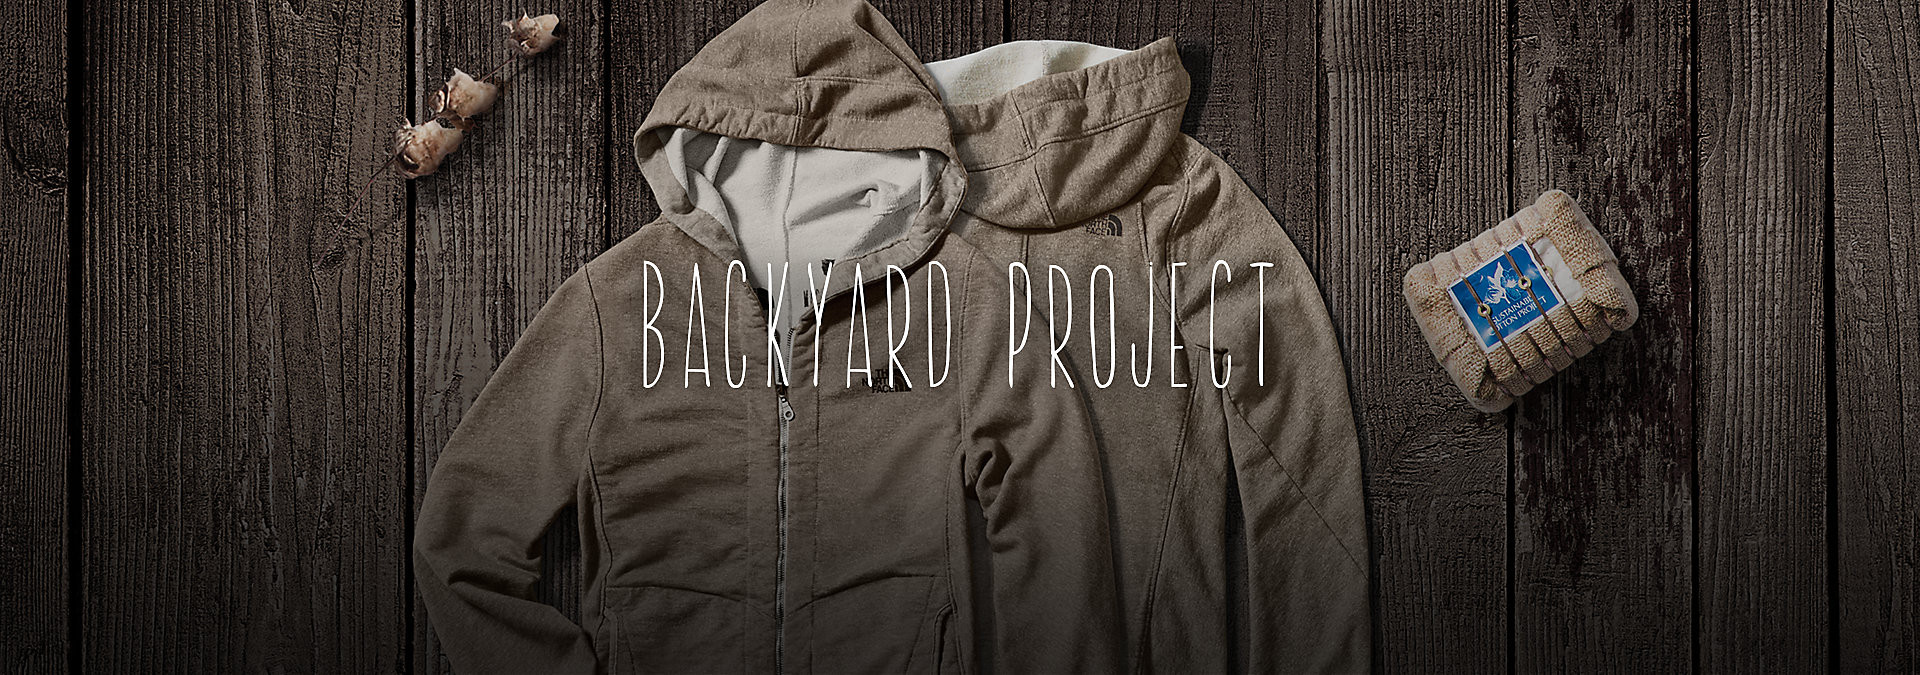 North Face Backyard Project
 The Road Ahead Talking Heads interview with Adam Mott